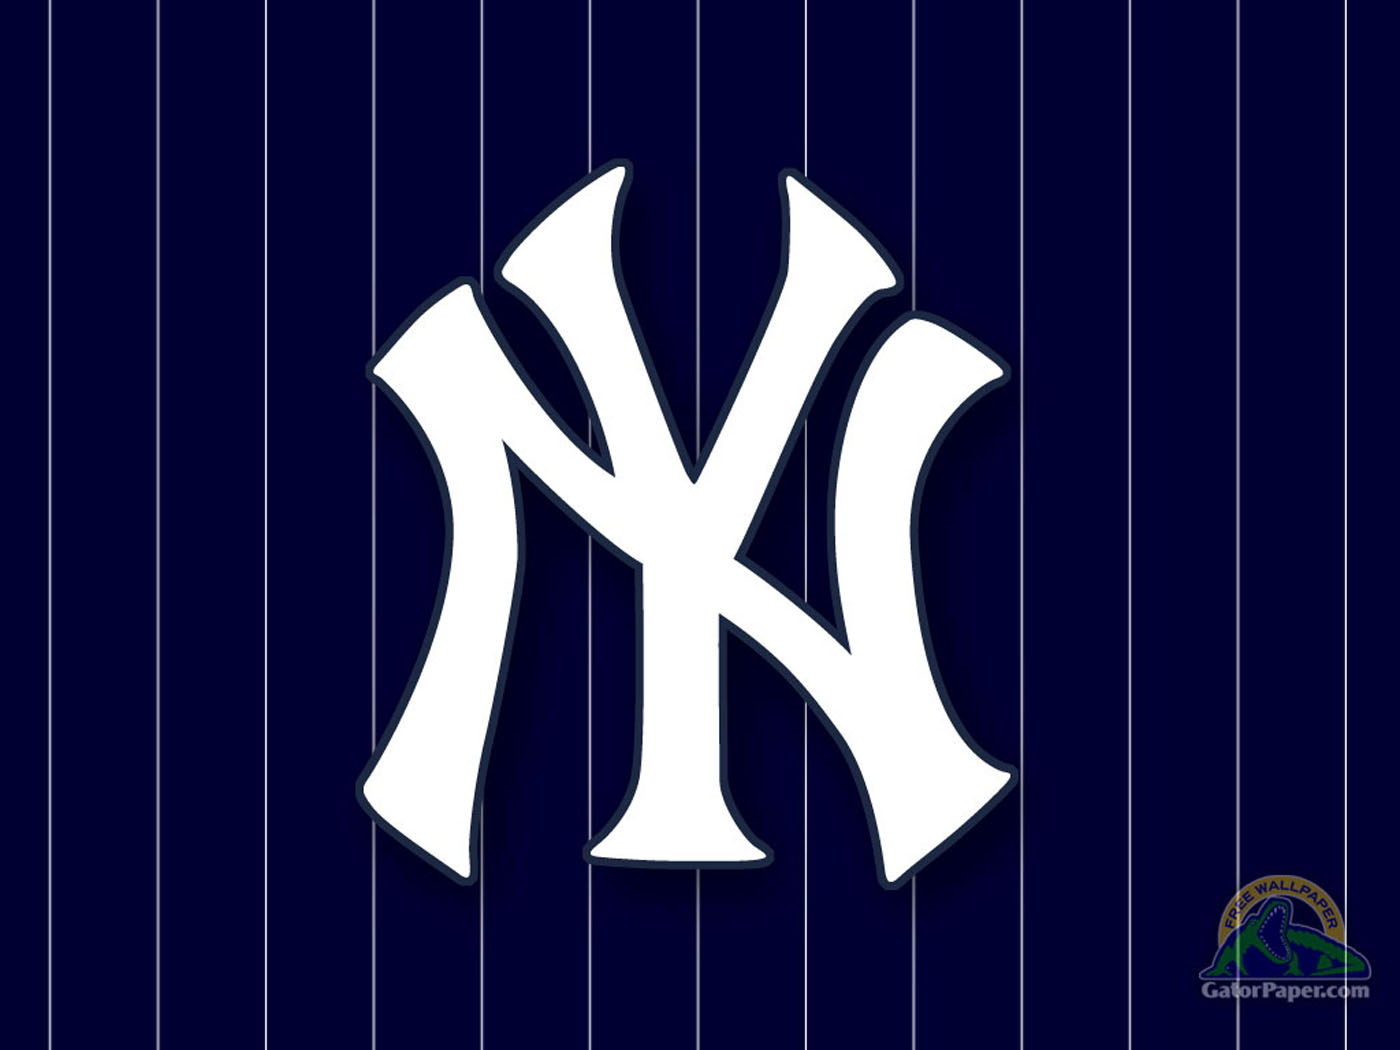 4. Step-by-Step Guide to Yankees Pinstripes Nail Art - wide 8